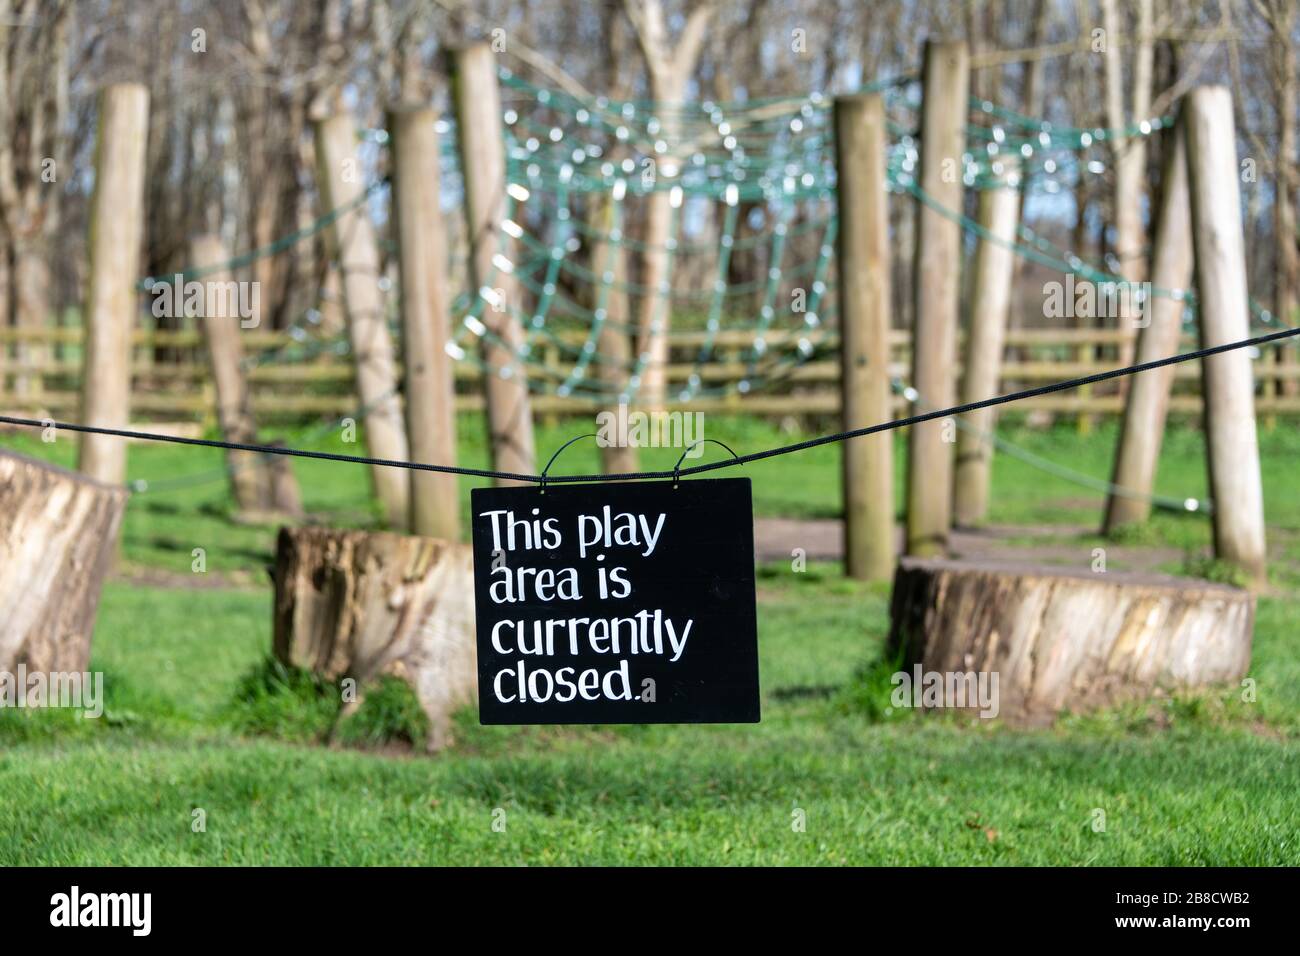 Wimborne, Dorset, UK. Saturday 21 March 2020. Children's play area closed to stop the spread of Coronavirus. The National Trust opened their gardens to all, for free, during the Coronavirus outbreak in the UK. Credit: Thomas Faull/Alamy Live News Stock Photo